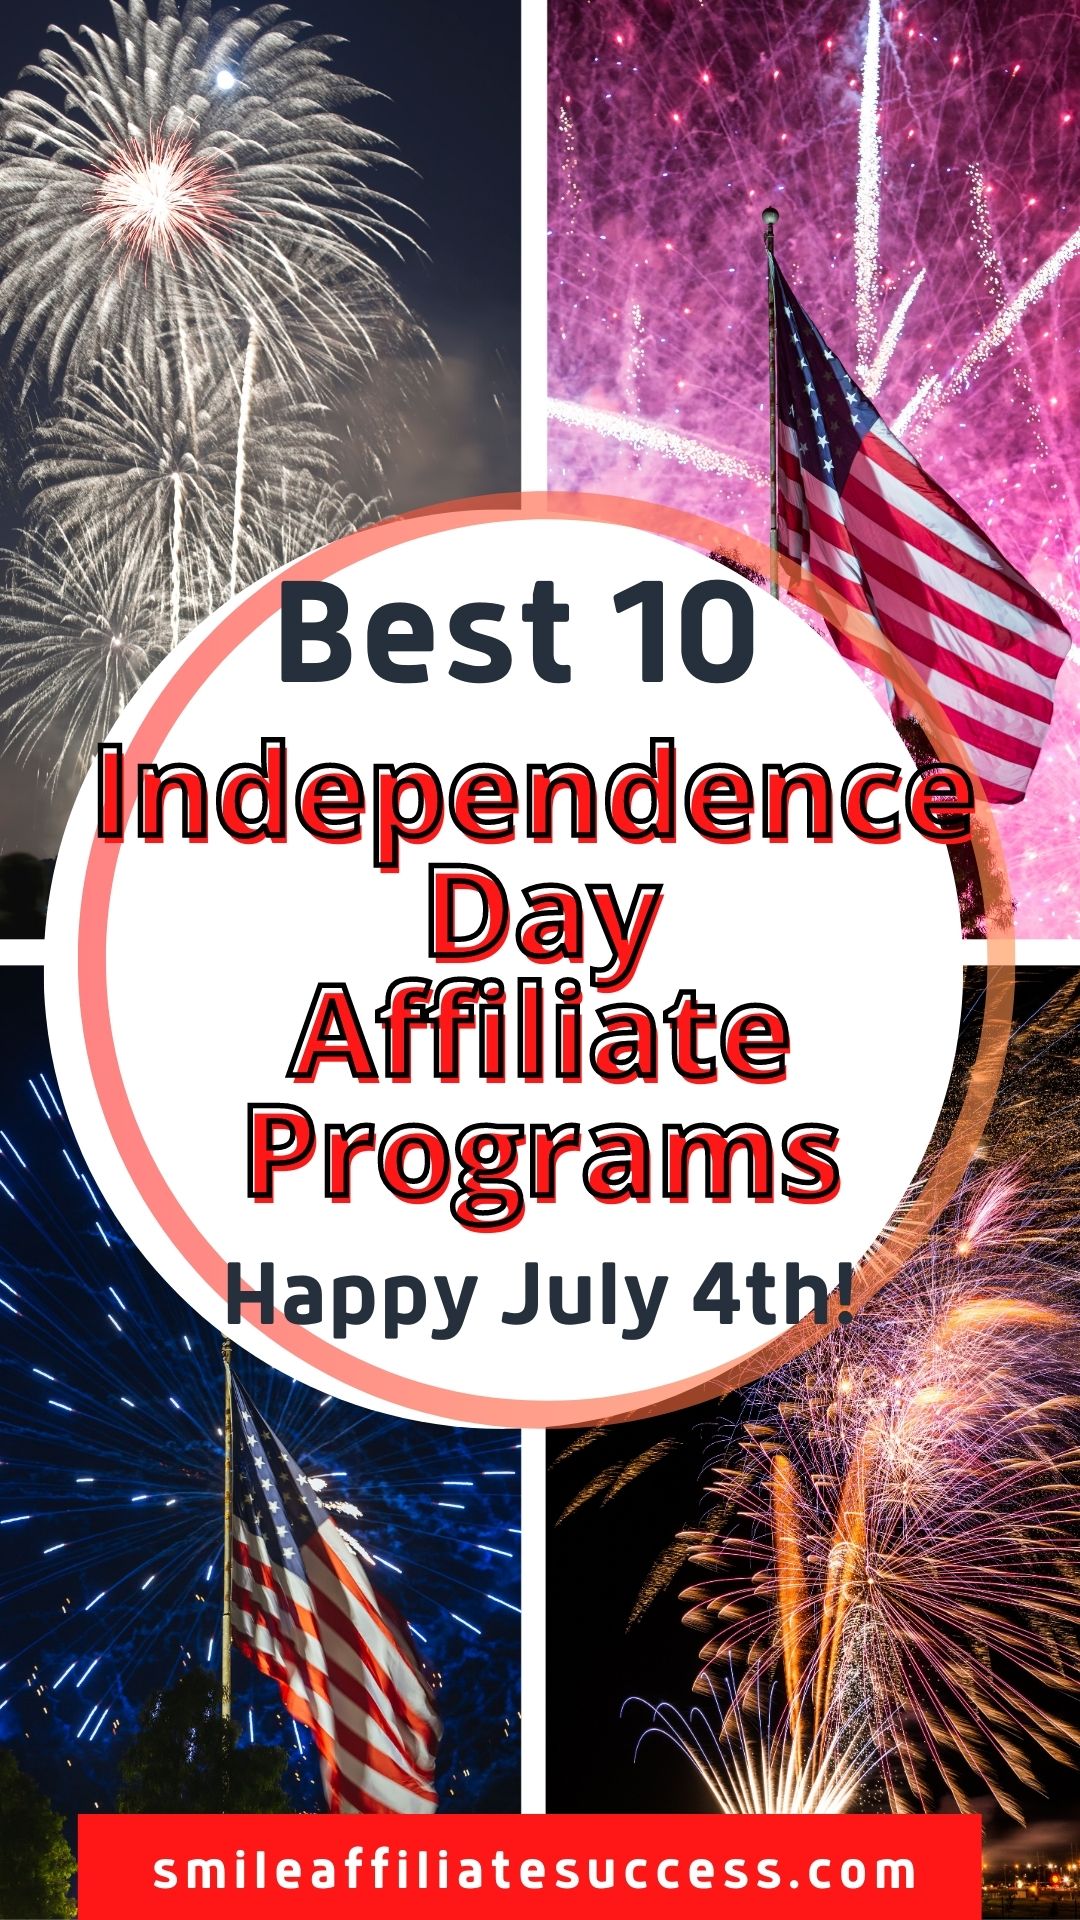 Best 10 Independence Day Affiliate Programs